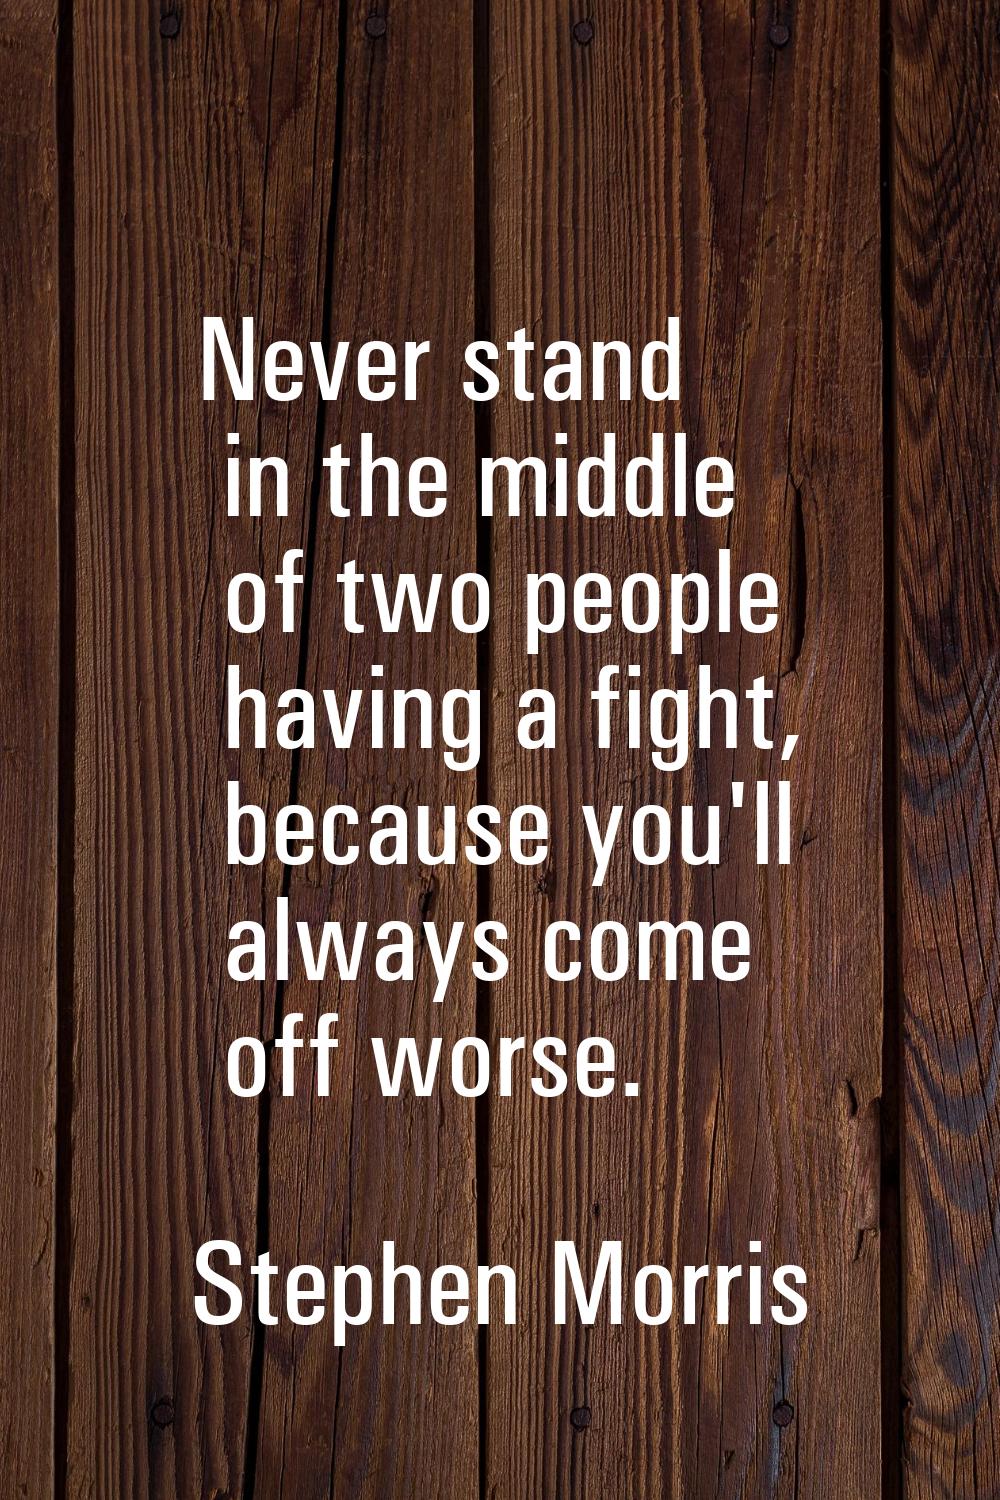 Never stand in the middle of two people having a fight, because you'll always come off worse.